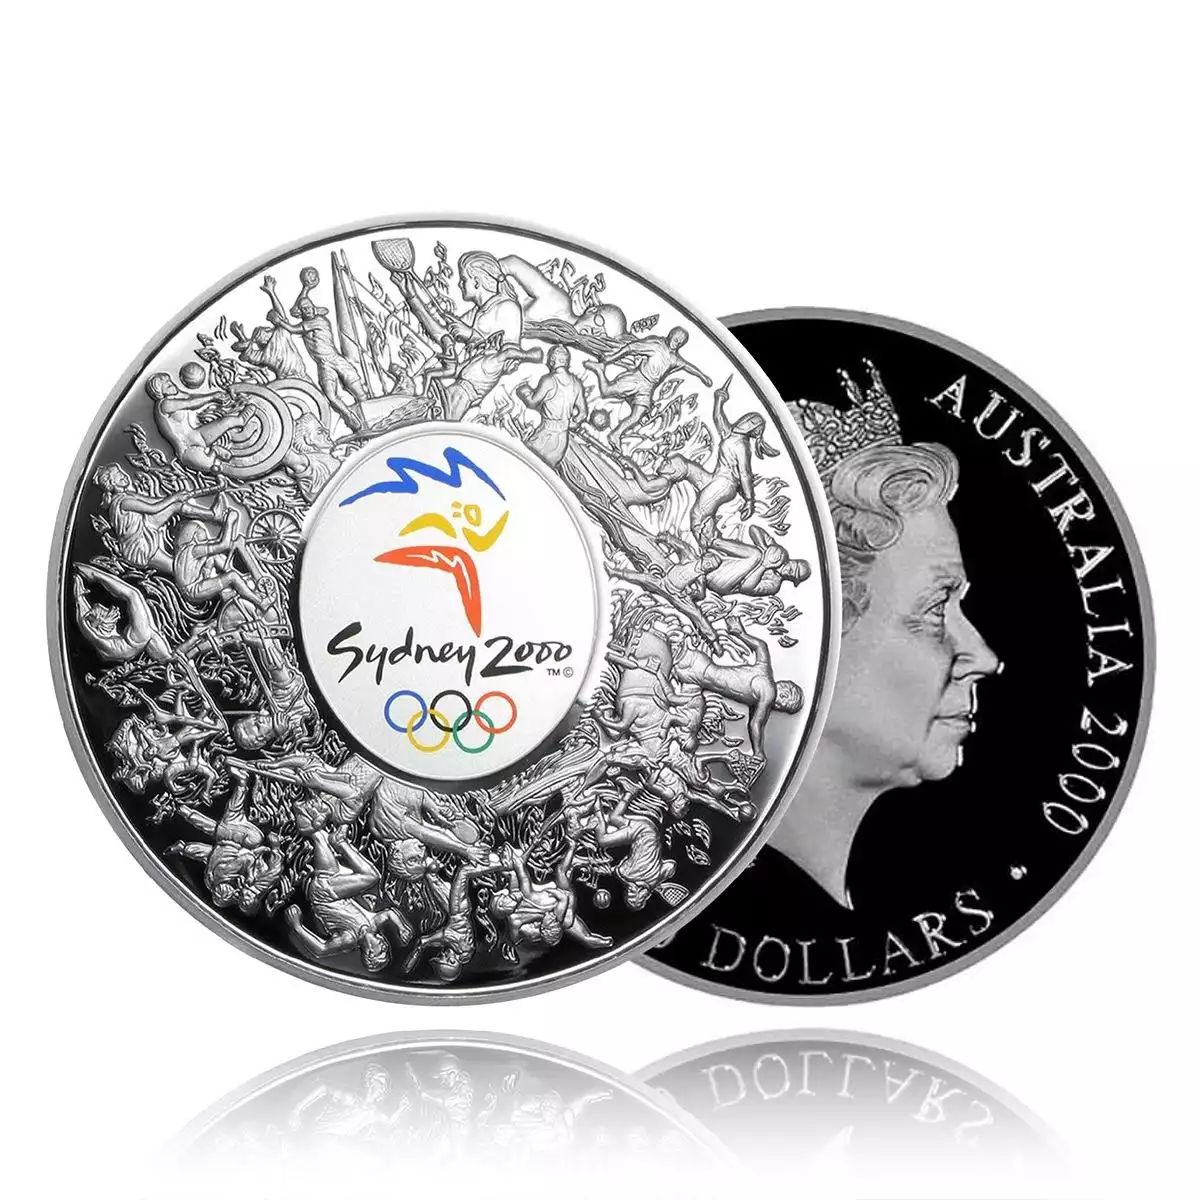 THE SYDNEY 2000 OLYMPIC SILVER COIN